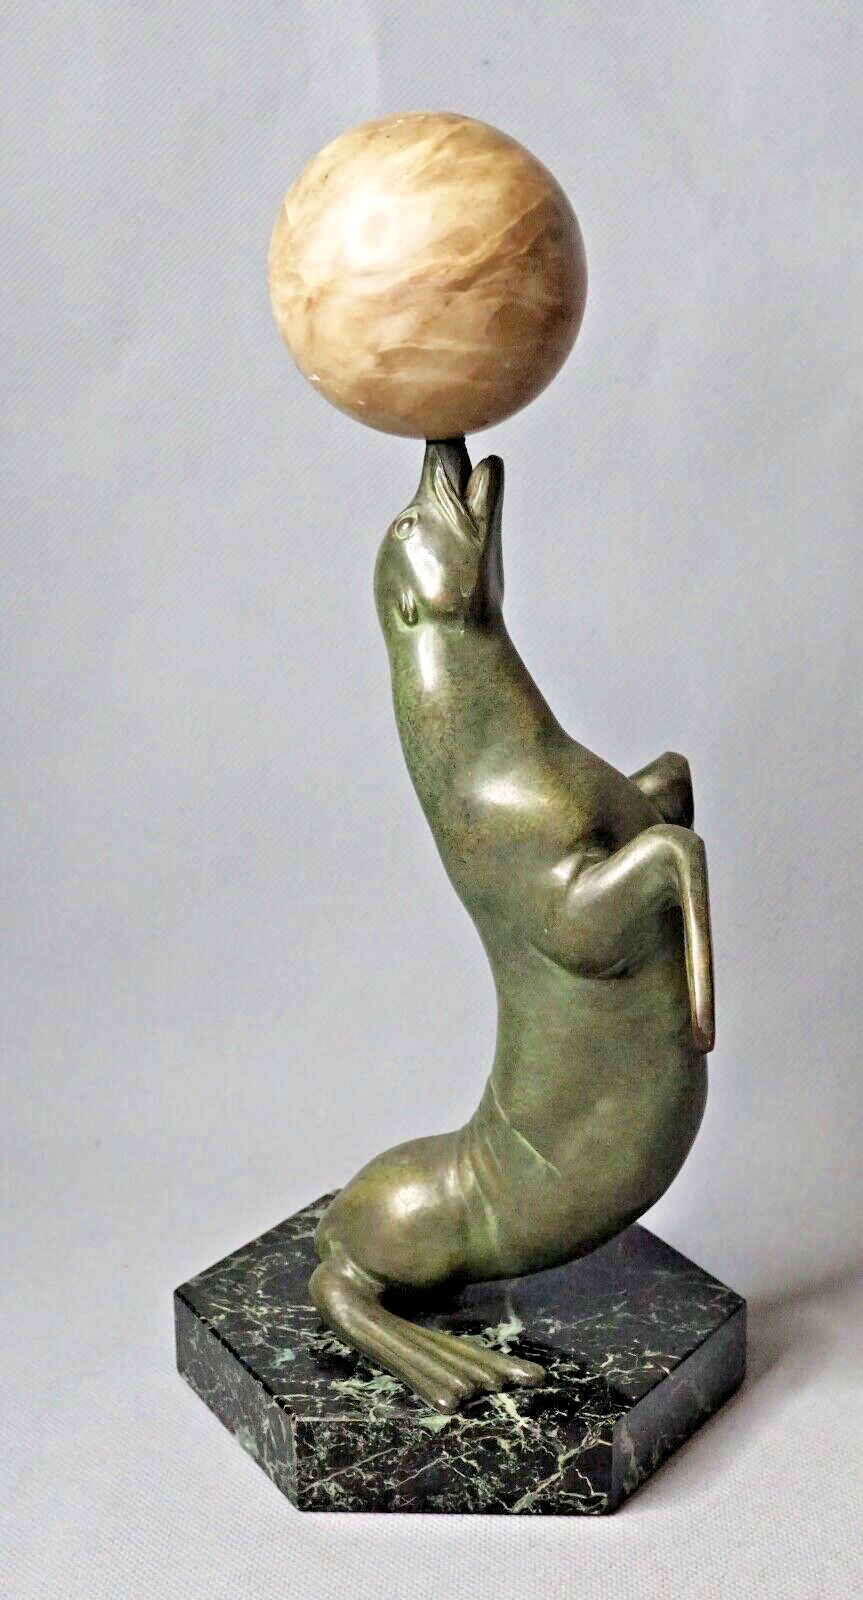 1920s Art Deco French Sculpture Bookend Sea Lion Playing Ball Marble Base Figure